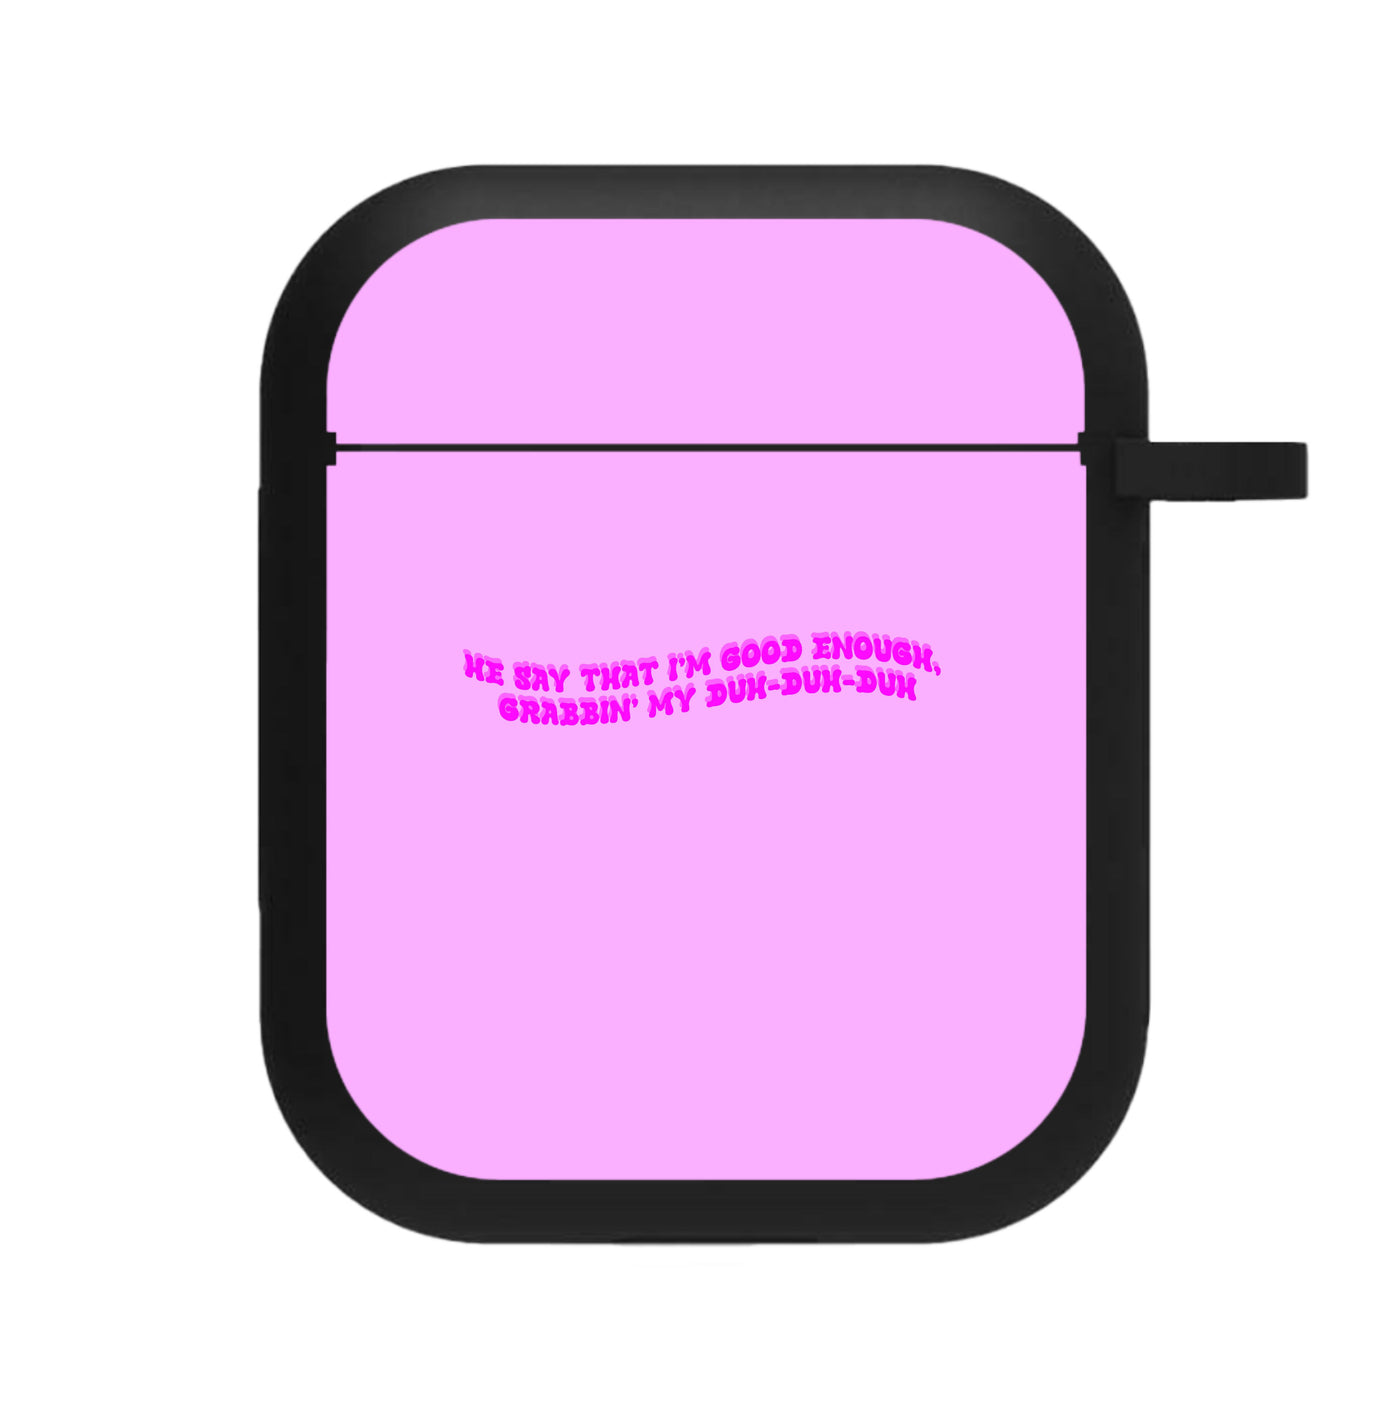 He Say That I'm Good Enough - Ice Spice AirPods Case